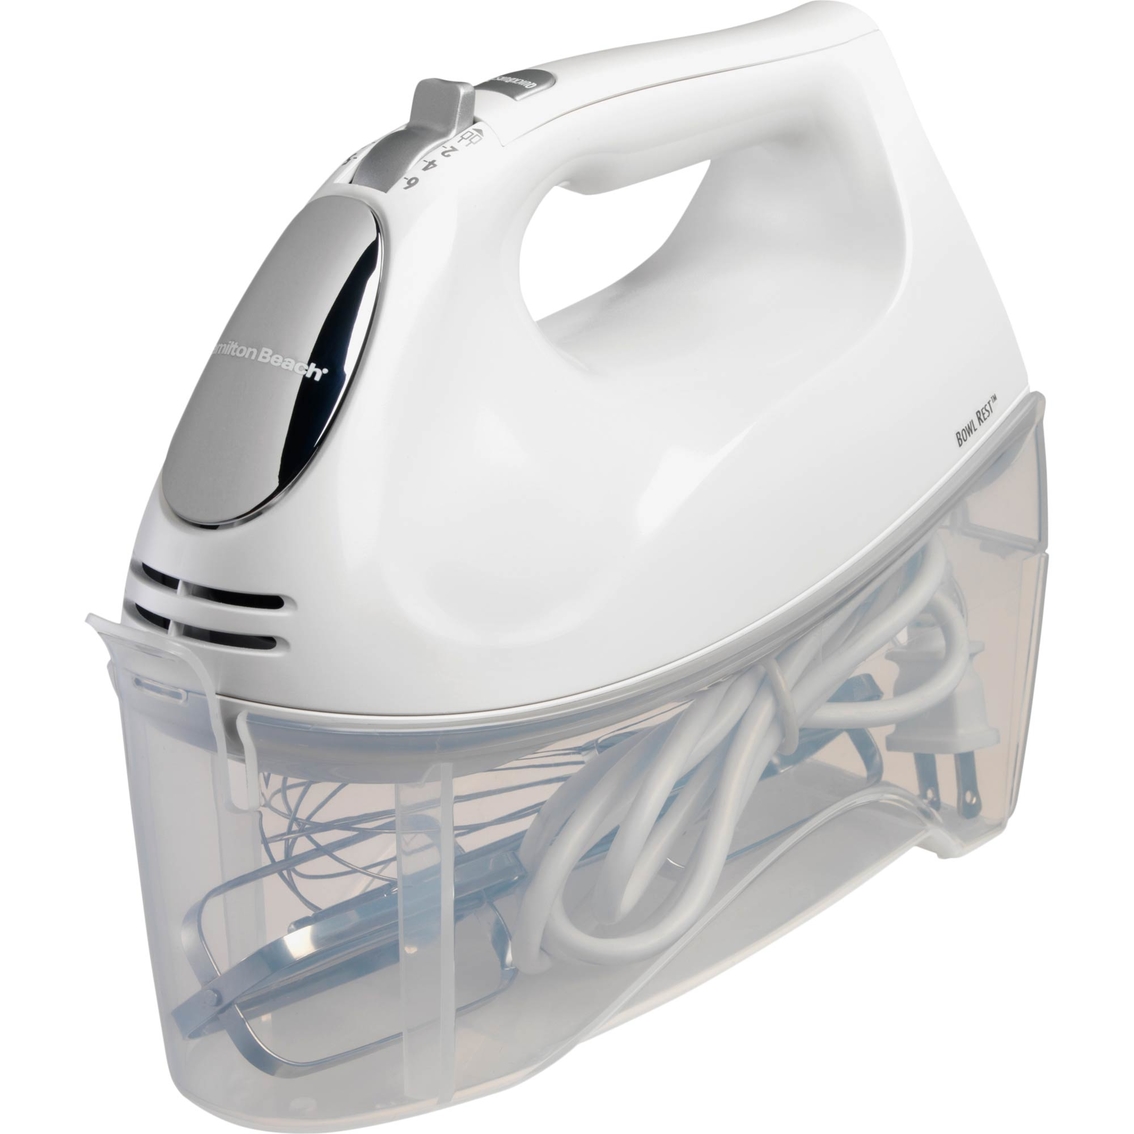 Hamilton Beach 6 Speed Hand Mixer with Snap-on Case and Easy Clean